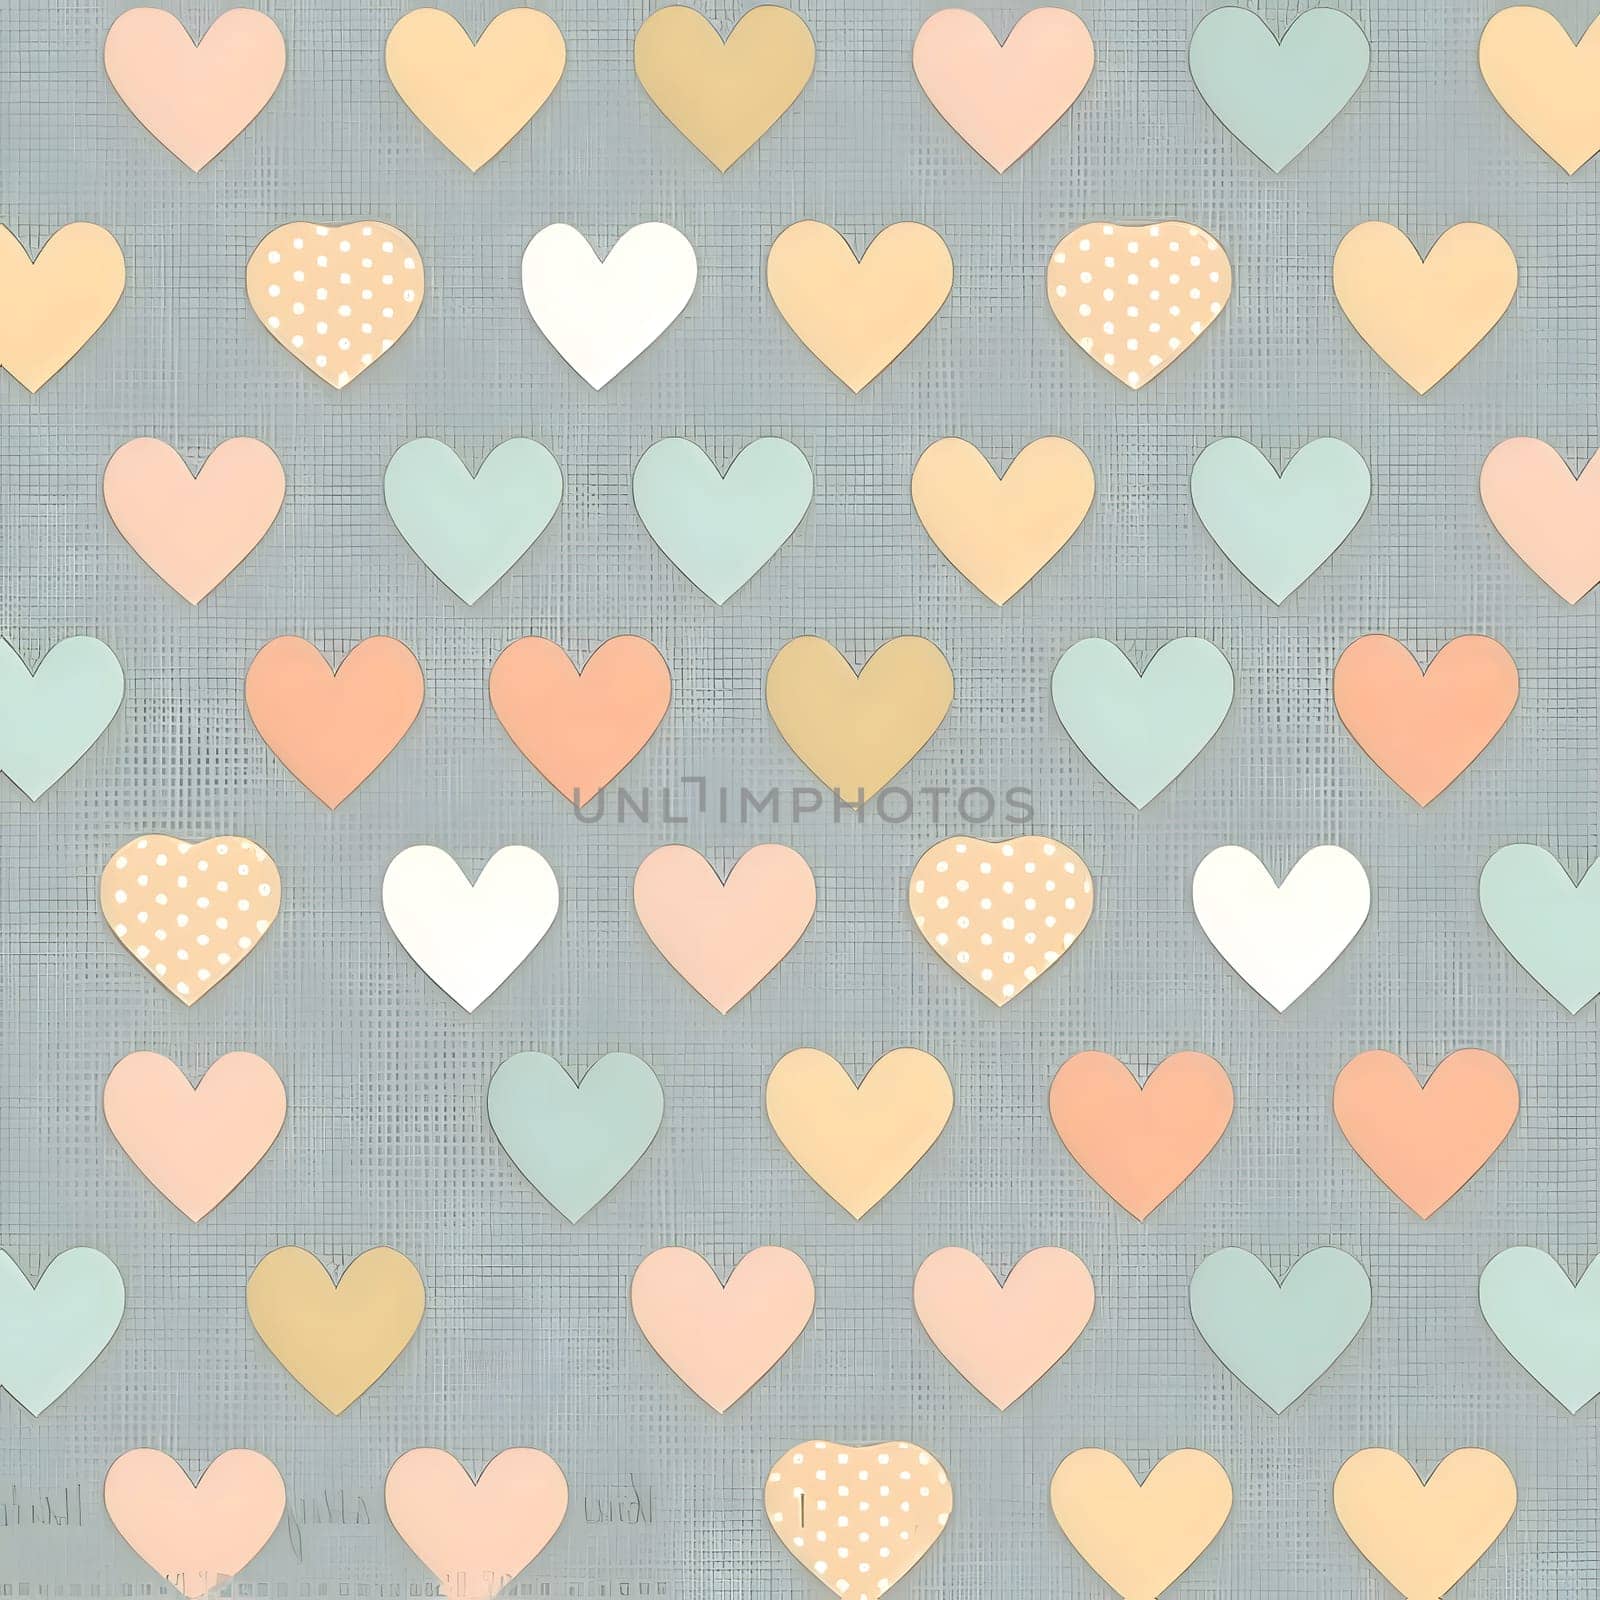 Patterns and banners backgrounds: Seamless pattern with colorful hearts on grey background. Vector illustration.